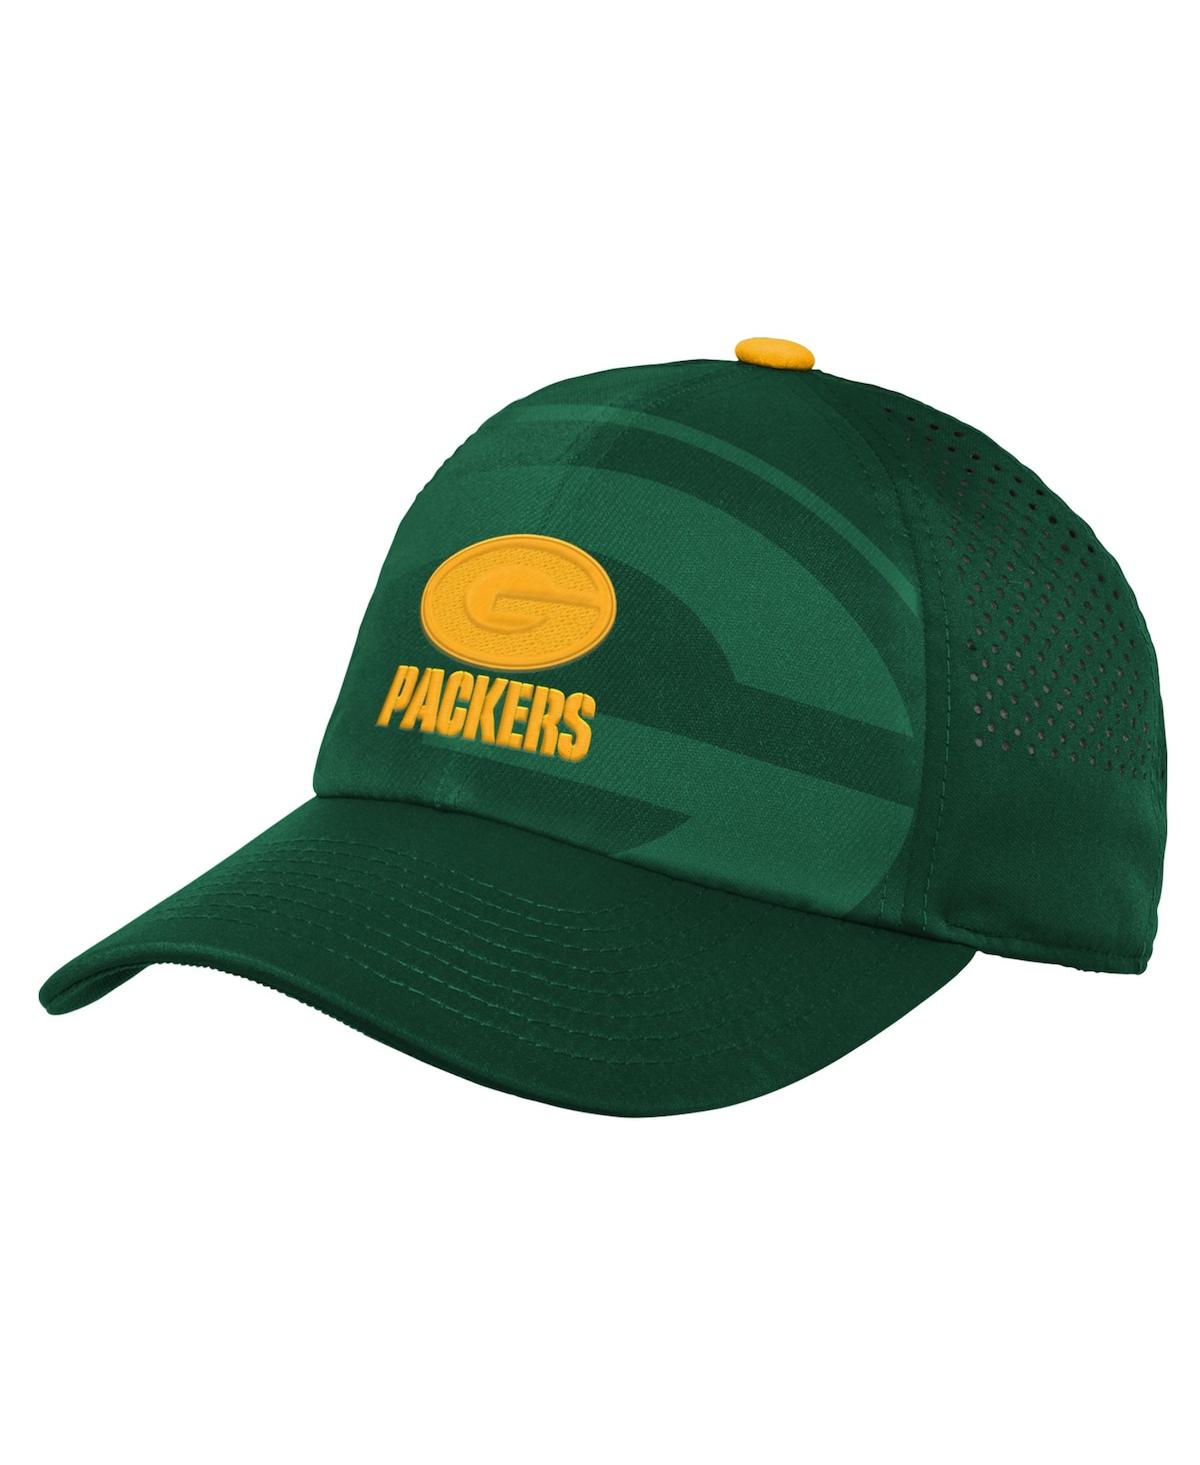 Outerstuff Kids' Youth Boy's And Girls Green Green Bay Packers Tailgate Adjustable Hat